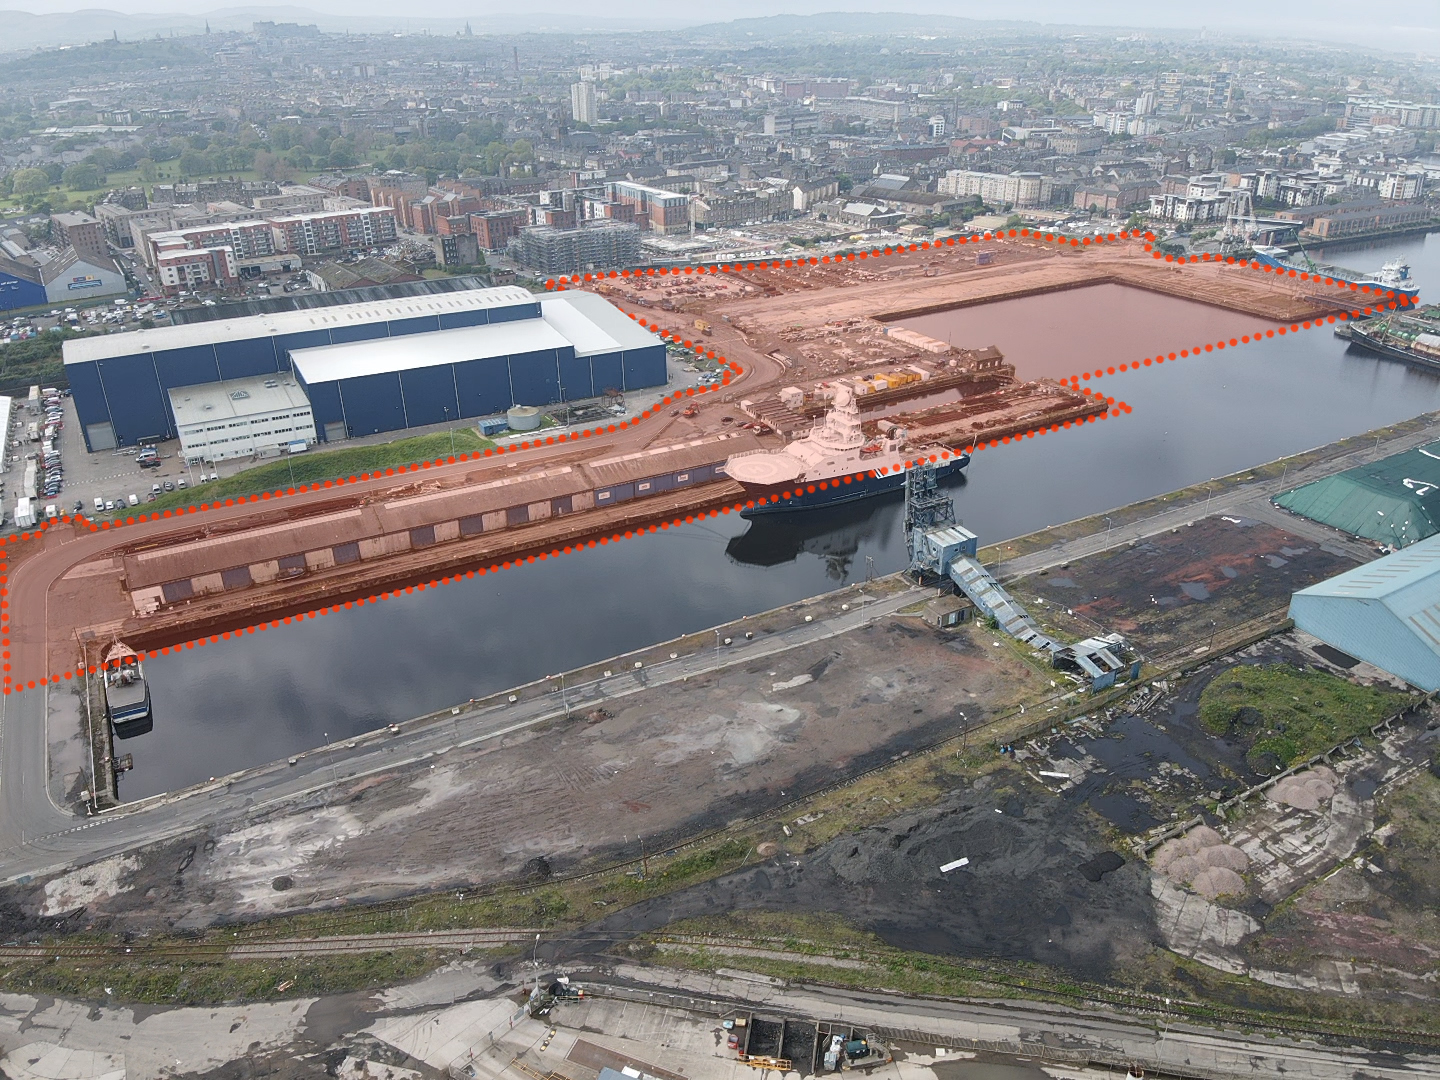 Forth Ports unveils plans for mixed-use development at Leith waterfront